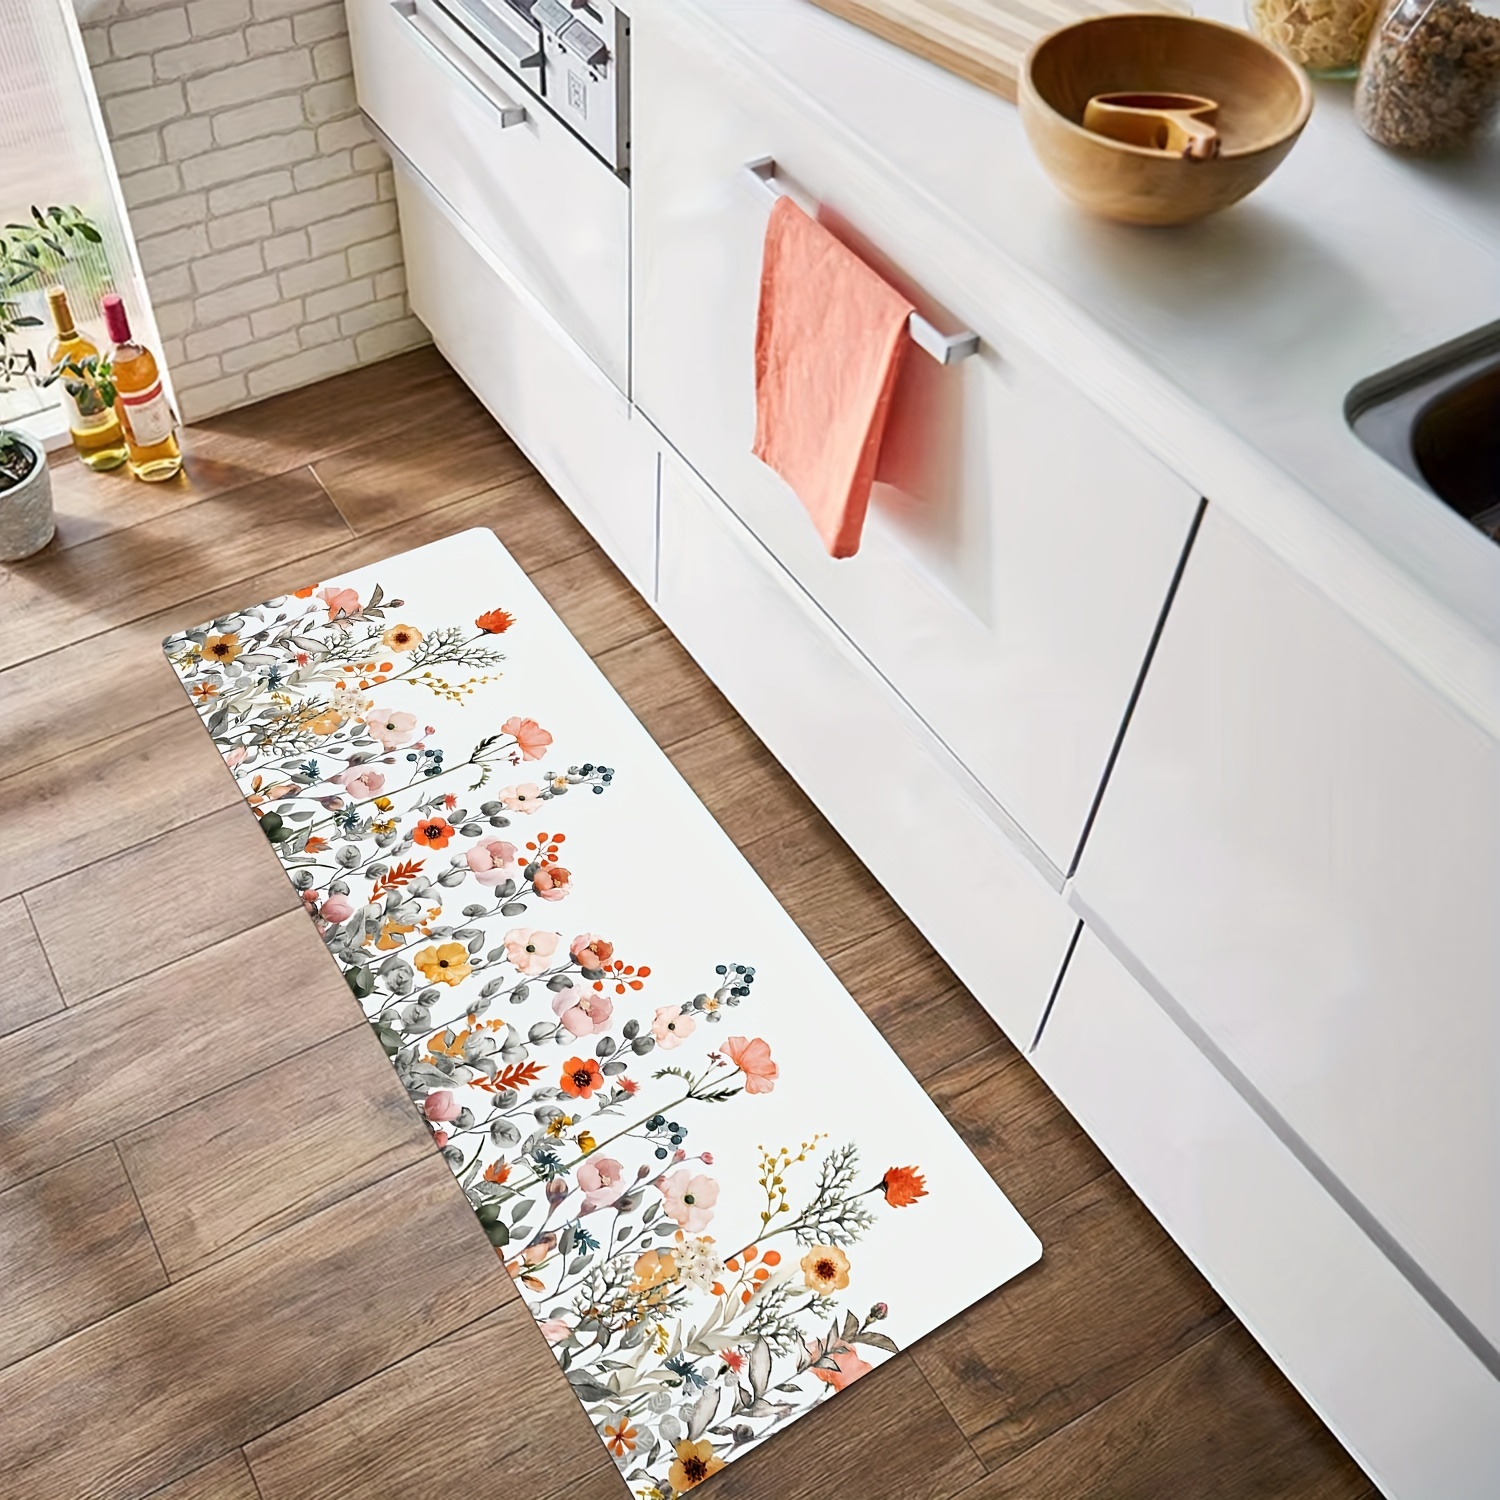 Soft Kitchen Floor Mats for in Front of Sink Super Absorbent Rugs